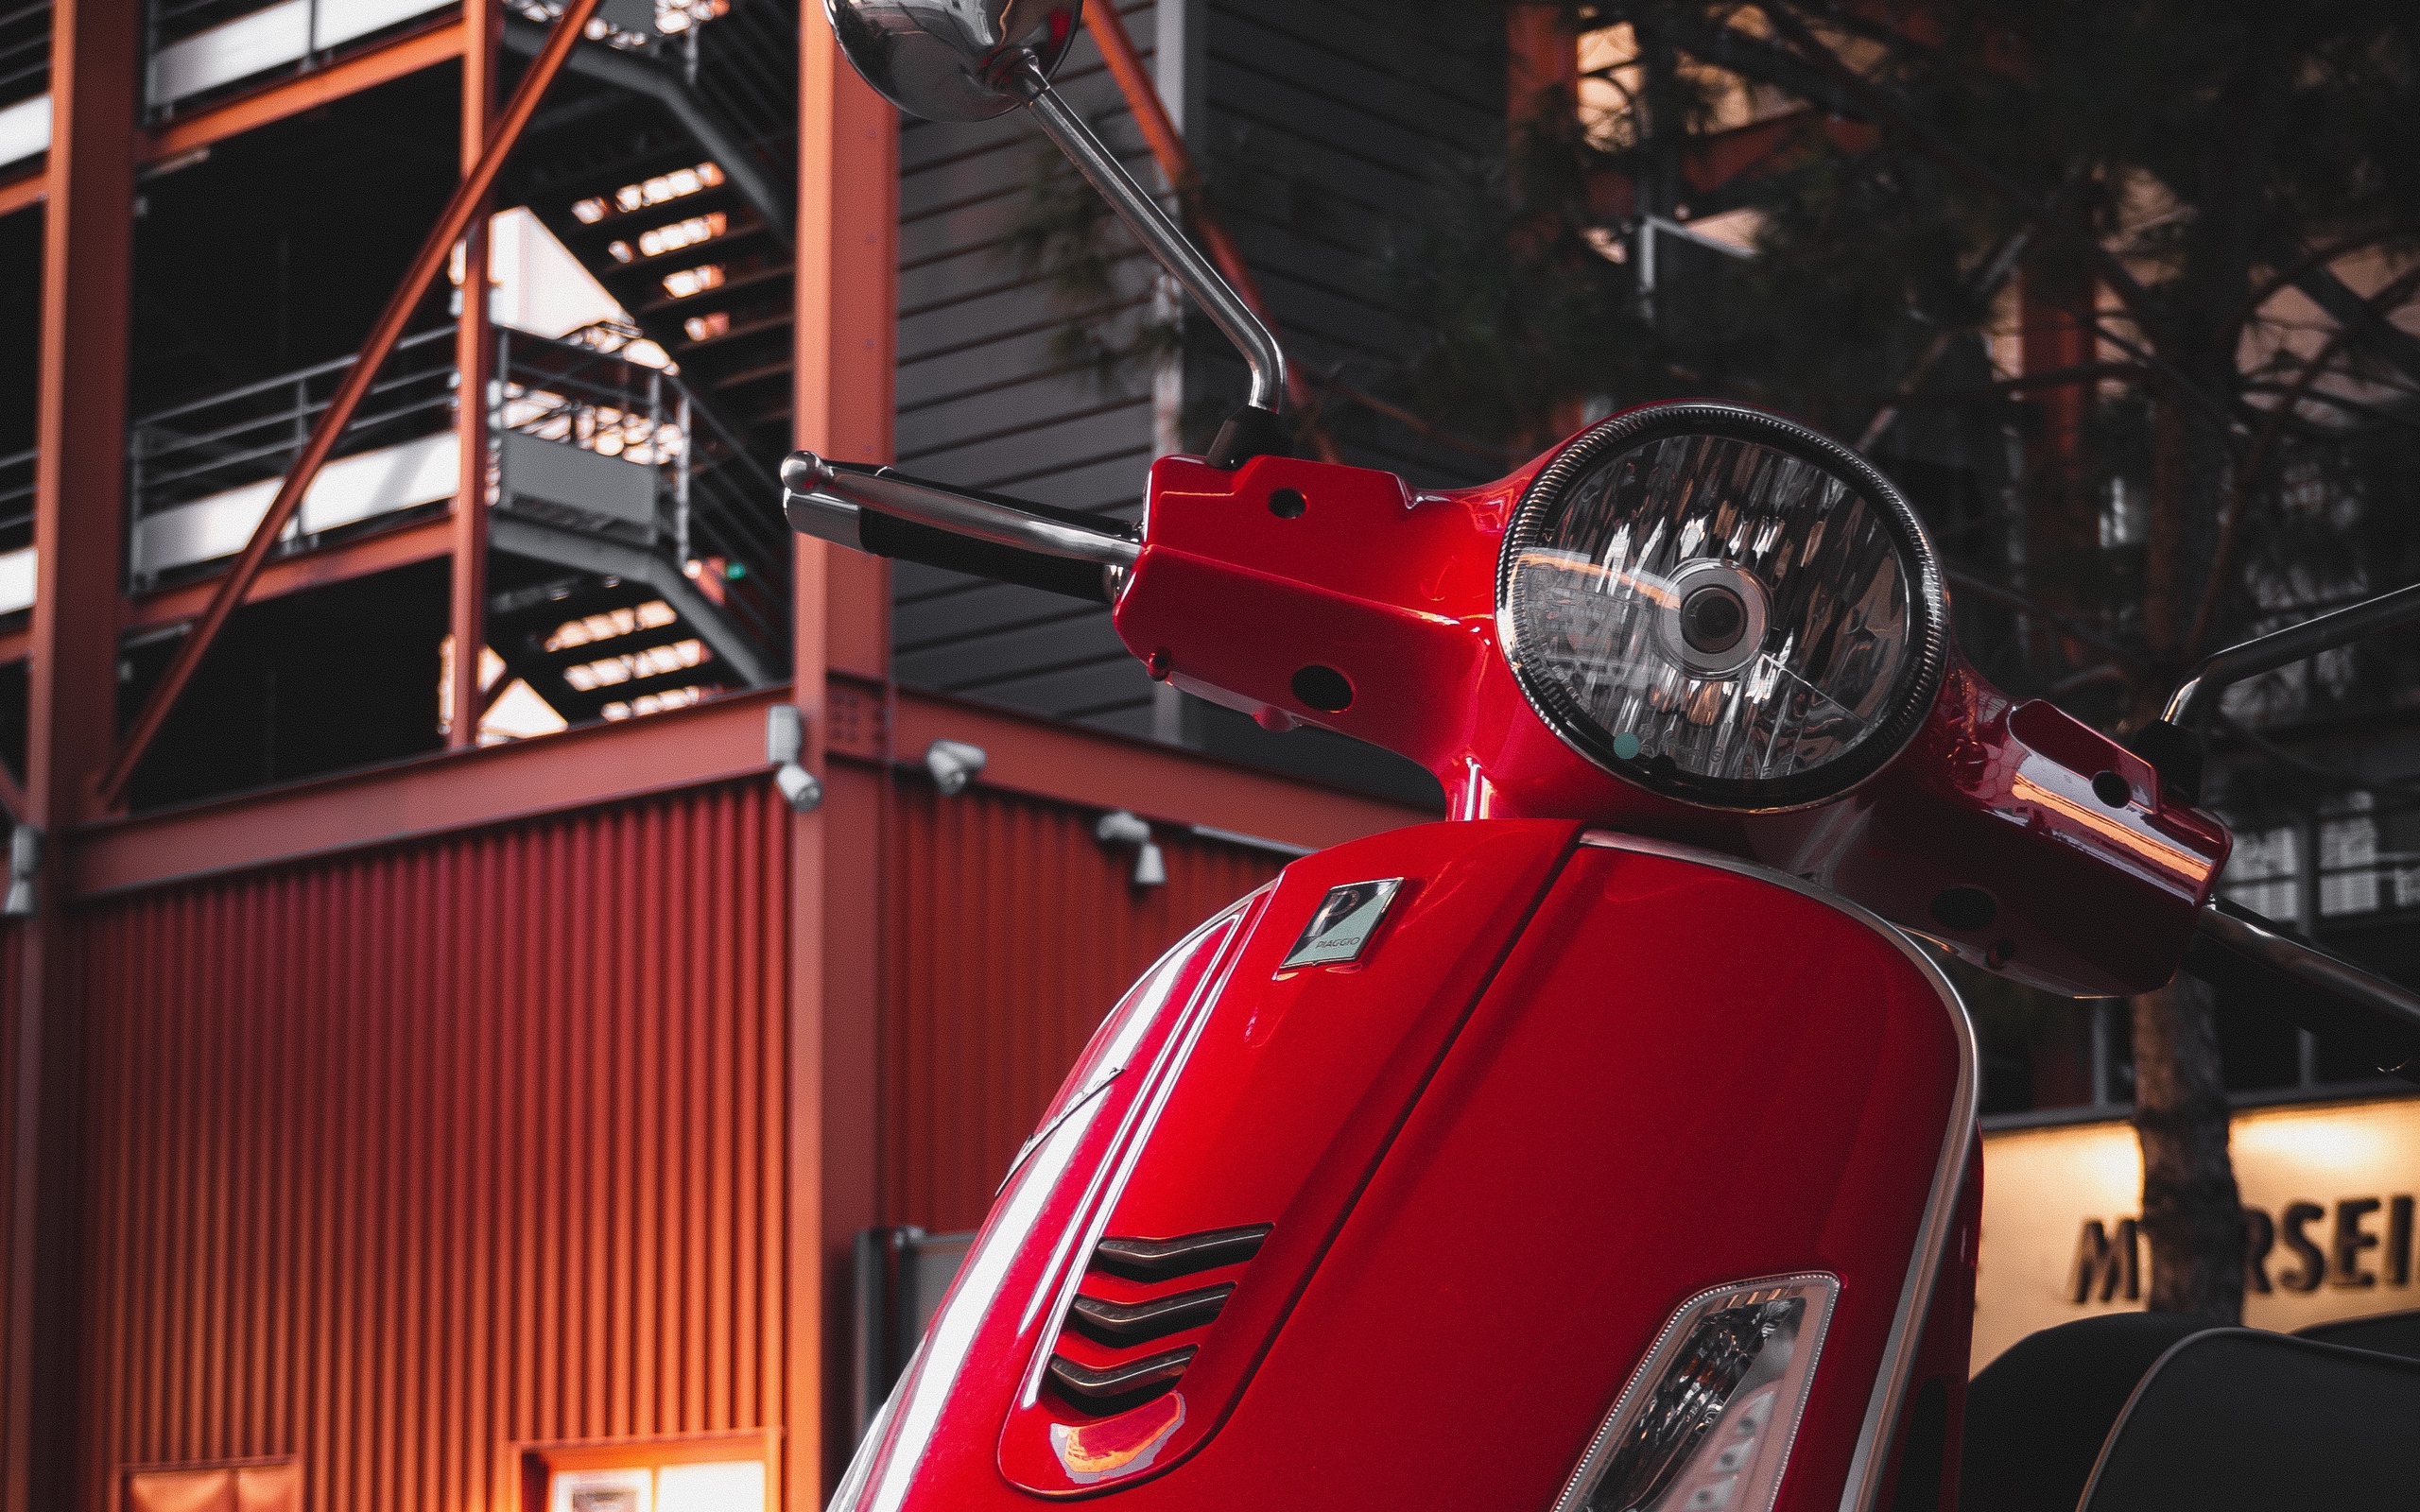 General 2560x1600 vehicle scooters photography building Italian motorcycles Vespa